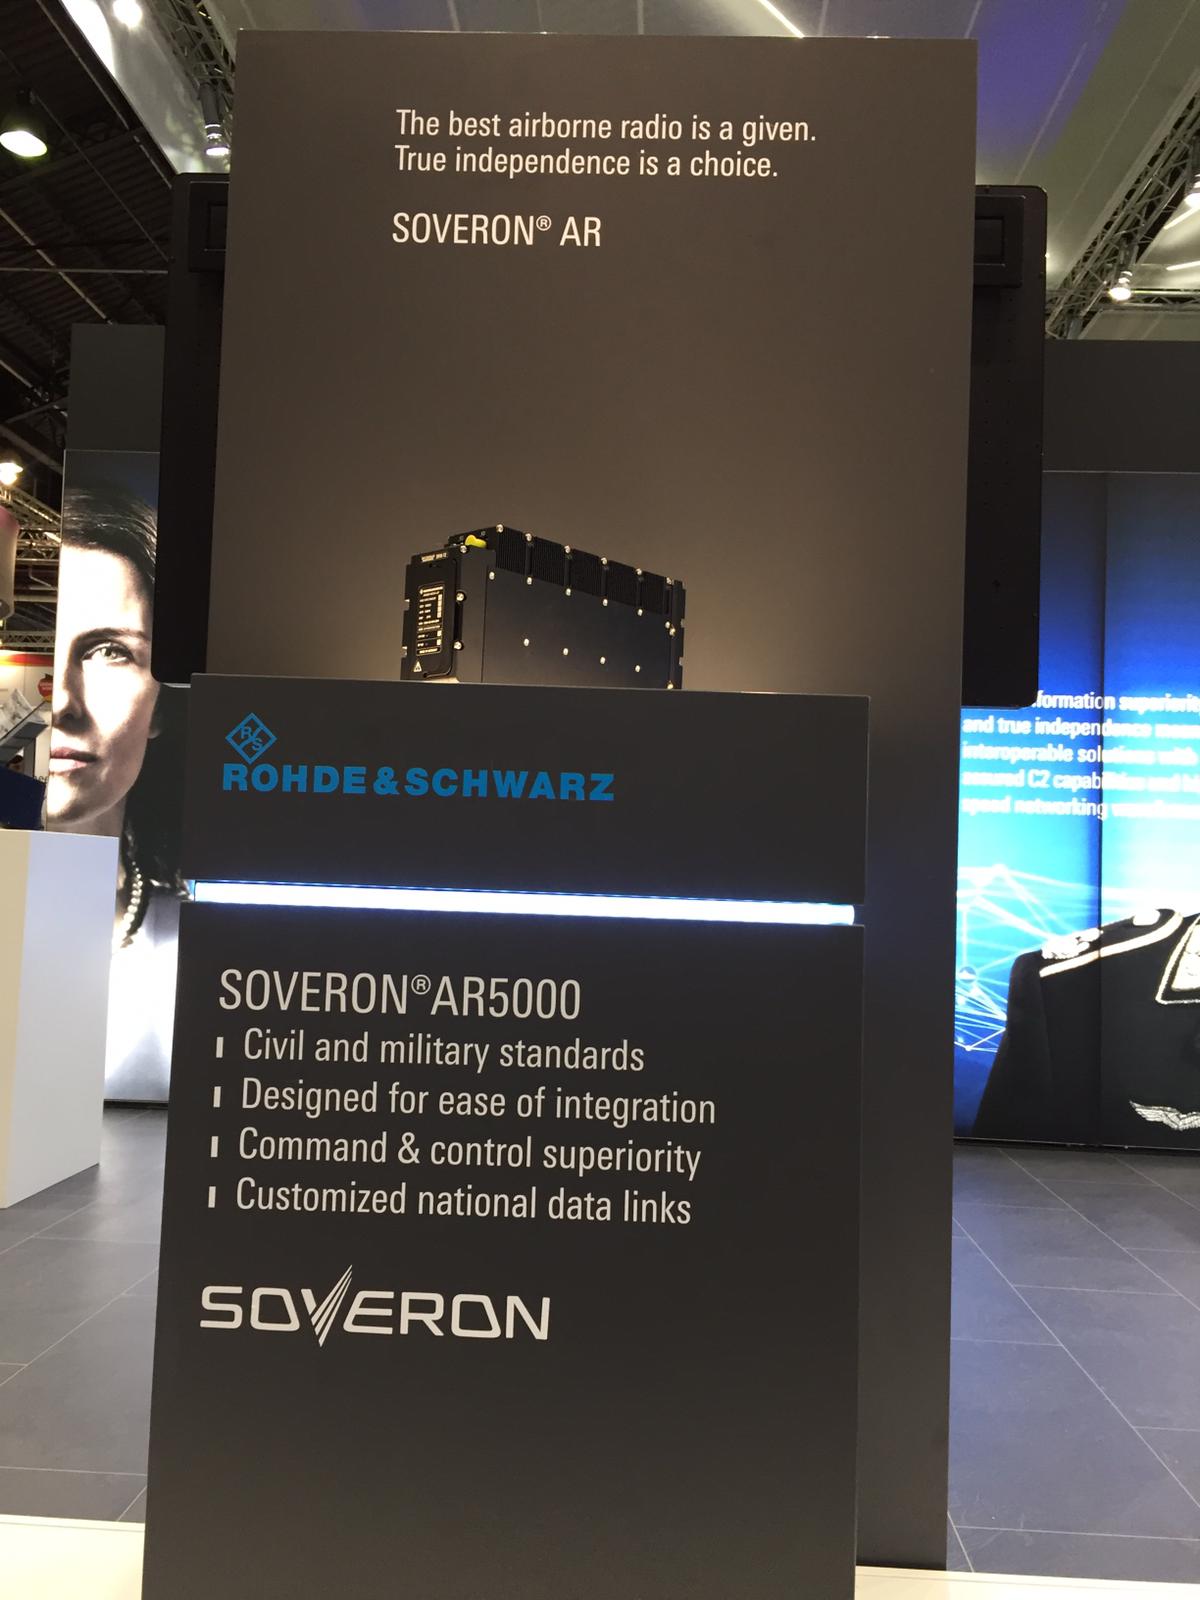 Rohde & Schwarz’ SOVERON AR brings the latest generation of software defined airborne radios (SDAR) and network-capable waveforms to the skies and to Paris Air Show. SOVERON AR offers wideband and secure voice and data communications for network centric operations and thanks to the radio's innovative technology, users can achieve information superiority during operations at a frequency range of 30-512 megahertz (MHz).